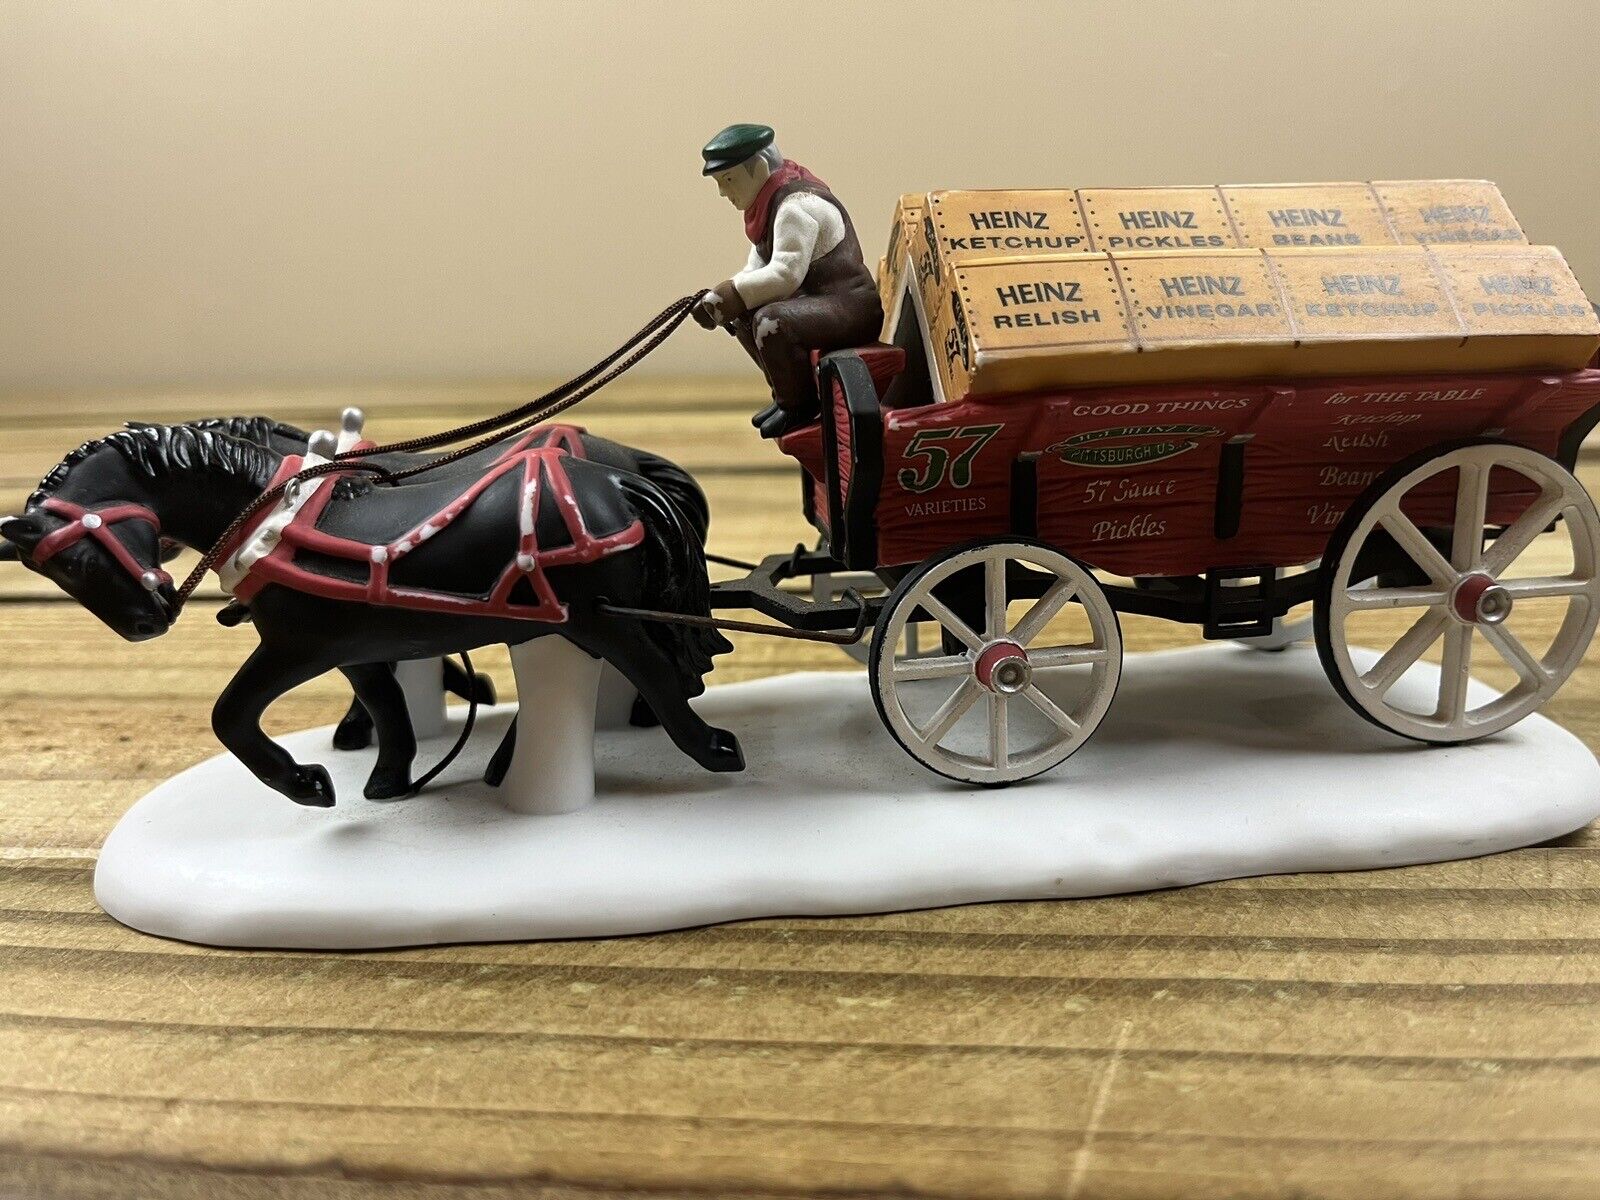 1999 Dept 56 Profiles H.J. Heinz Hitch Delivery Horse Wagon Limited Edition